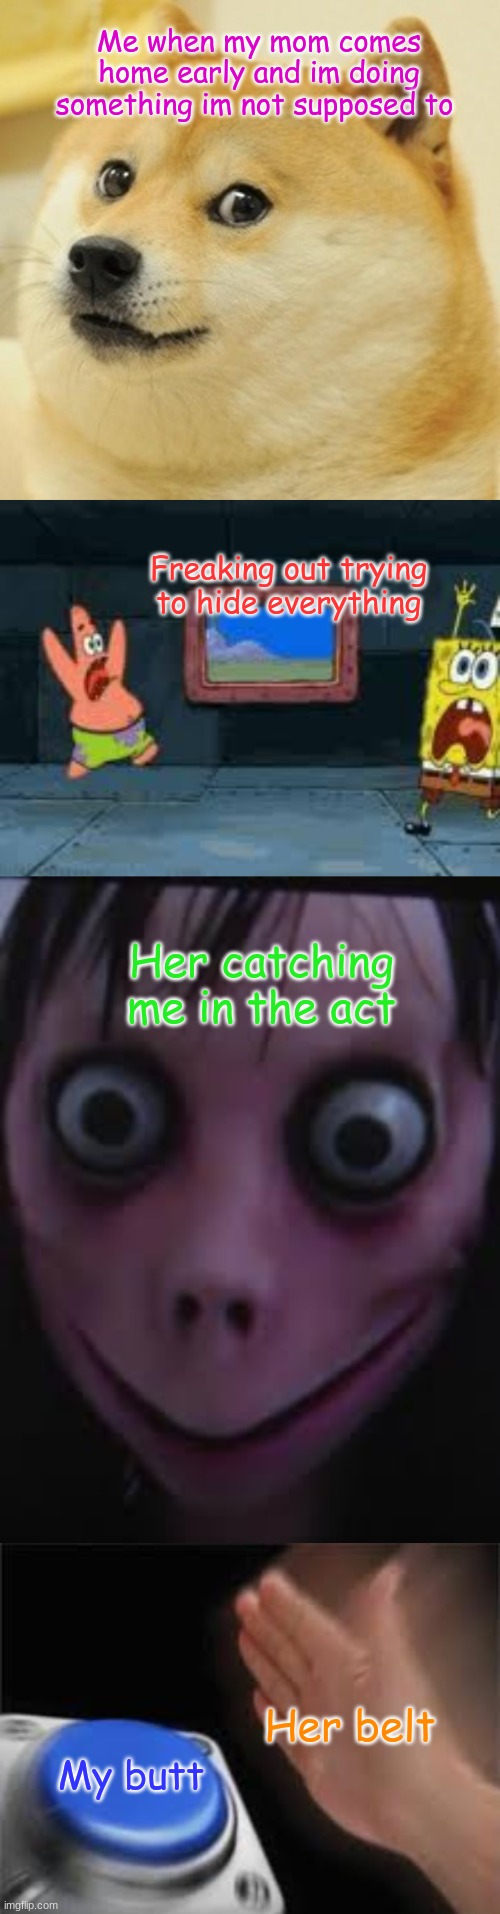 mom home early | Me when my mom comes home early and im doing something im not supposed to; Freaking out trying to hide everything; Her catching me in the act; Her belt; My butt | image tagged in mom,scary | made w/ Imgflip meme maker